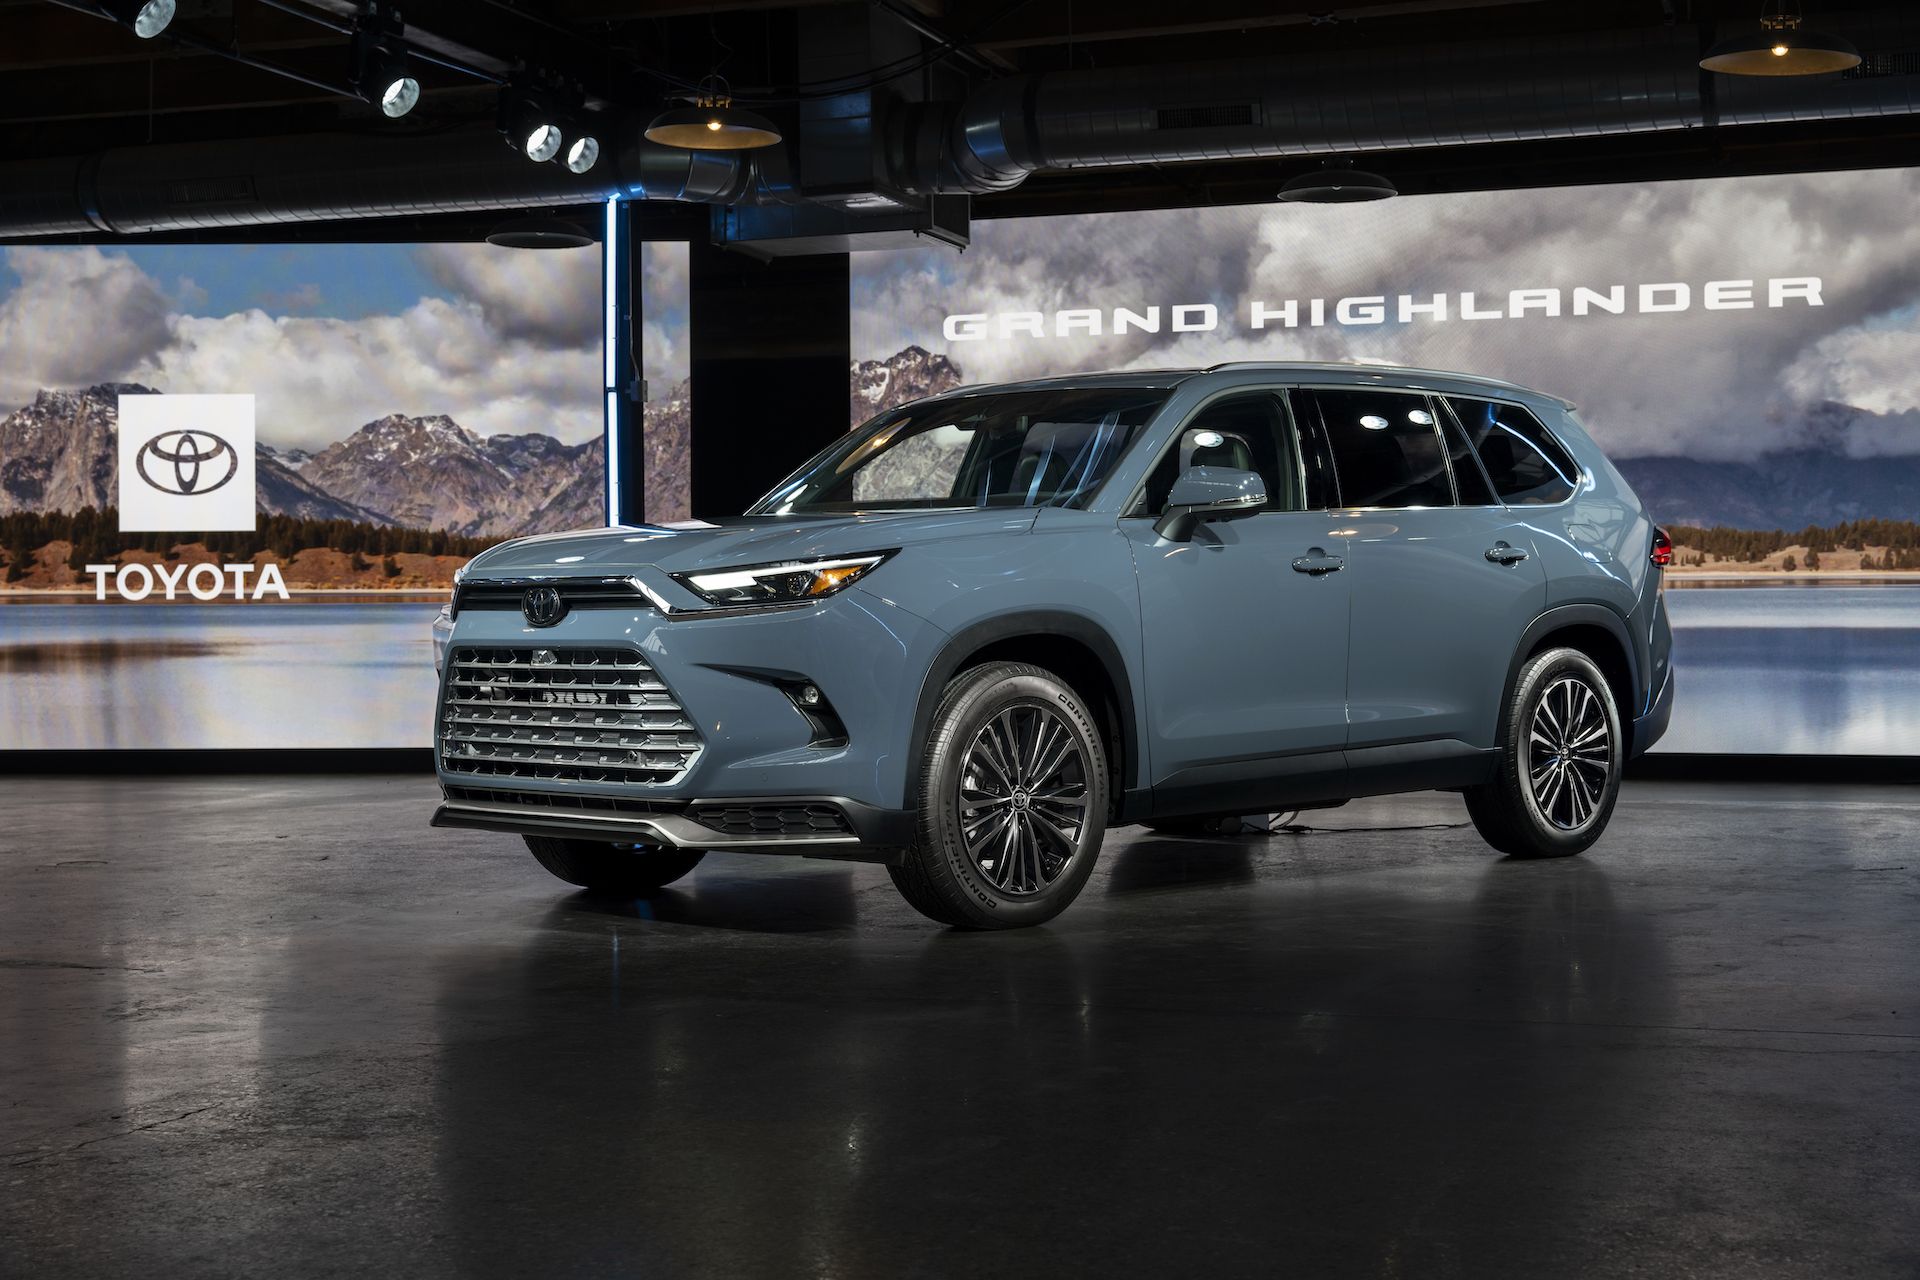 Introduce 134+ images where is the toyota highlander built In